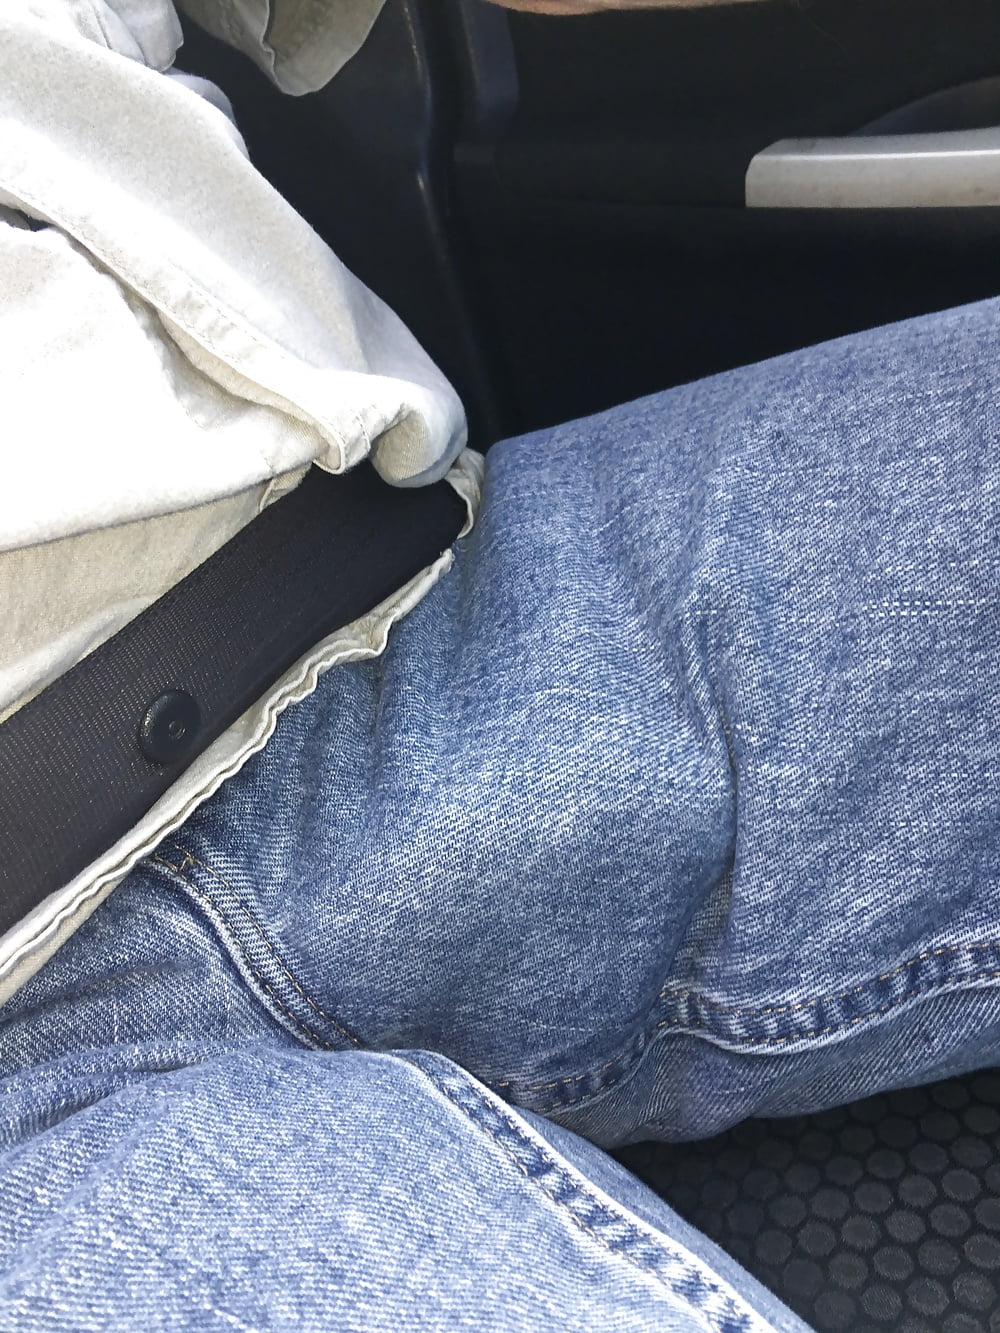 Big hard cock in Jeans #107330370